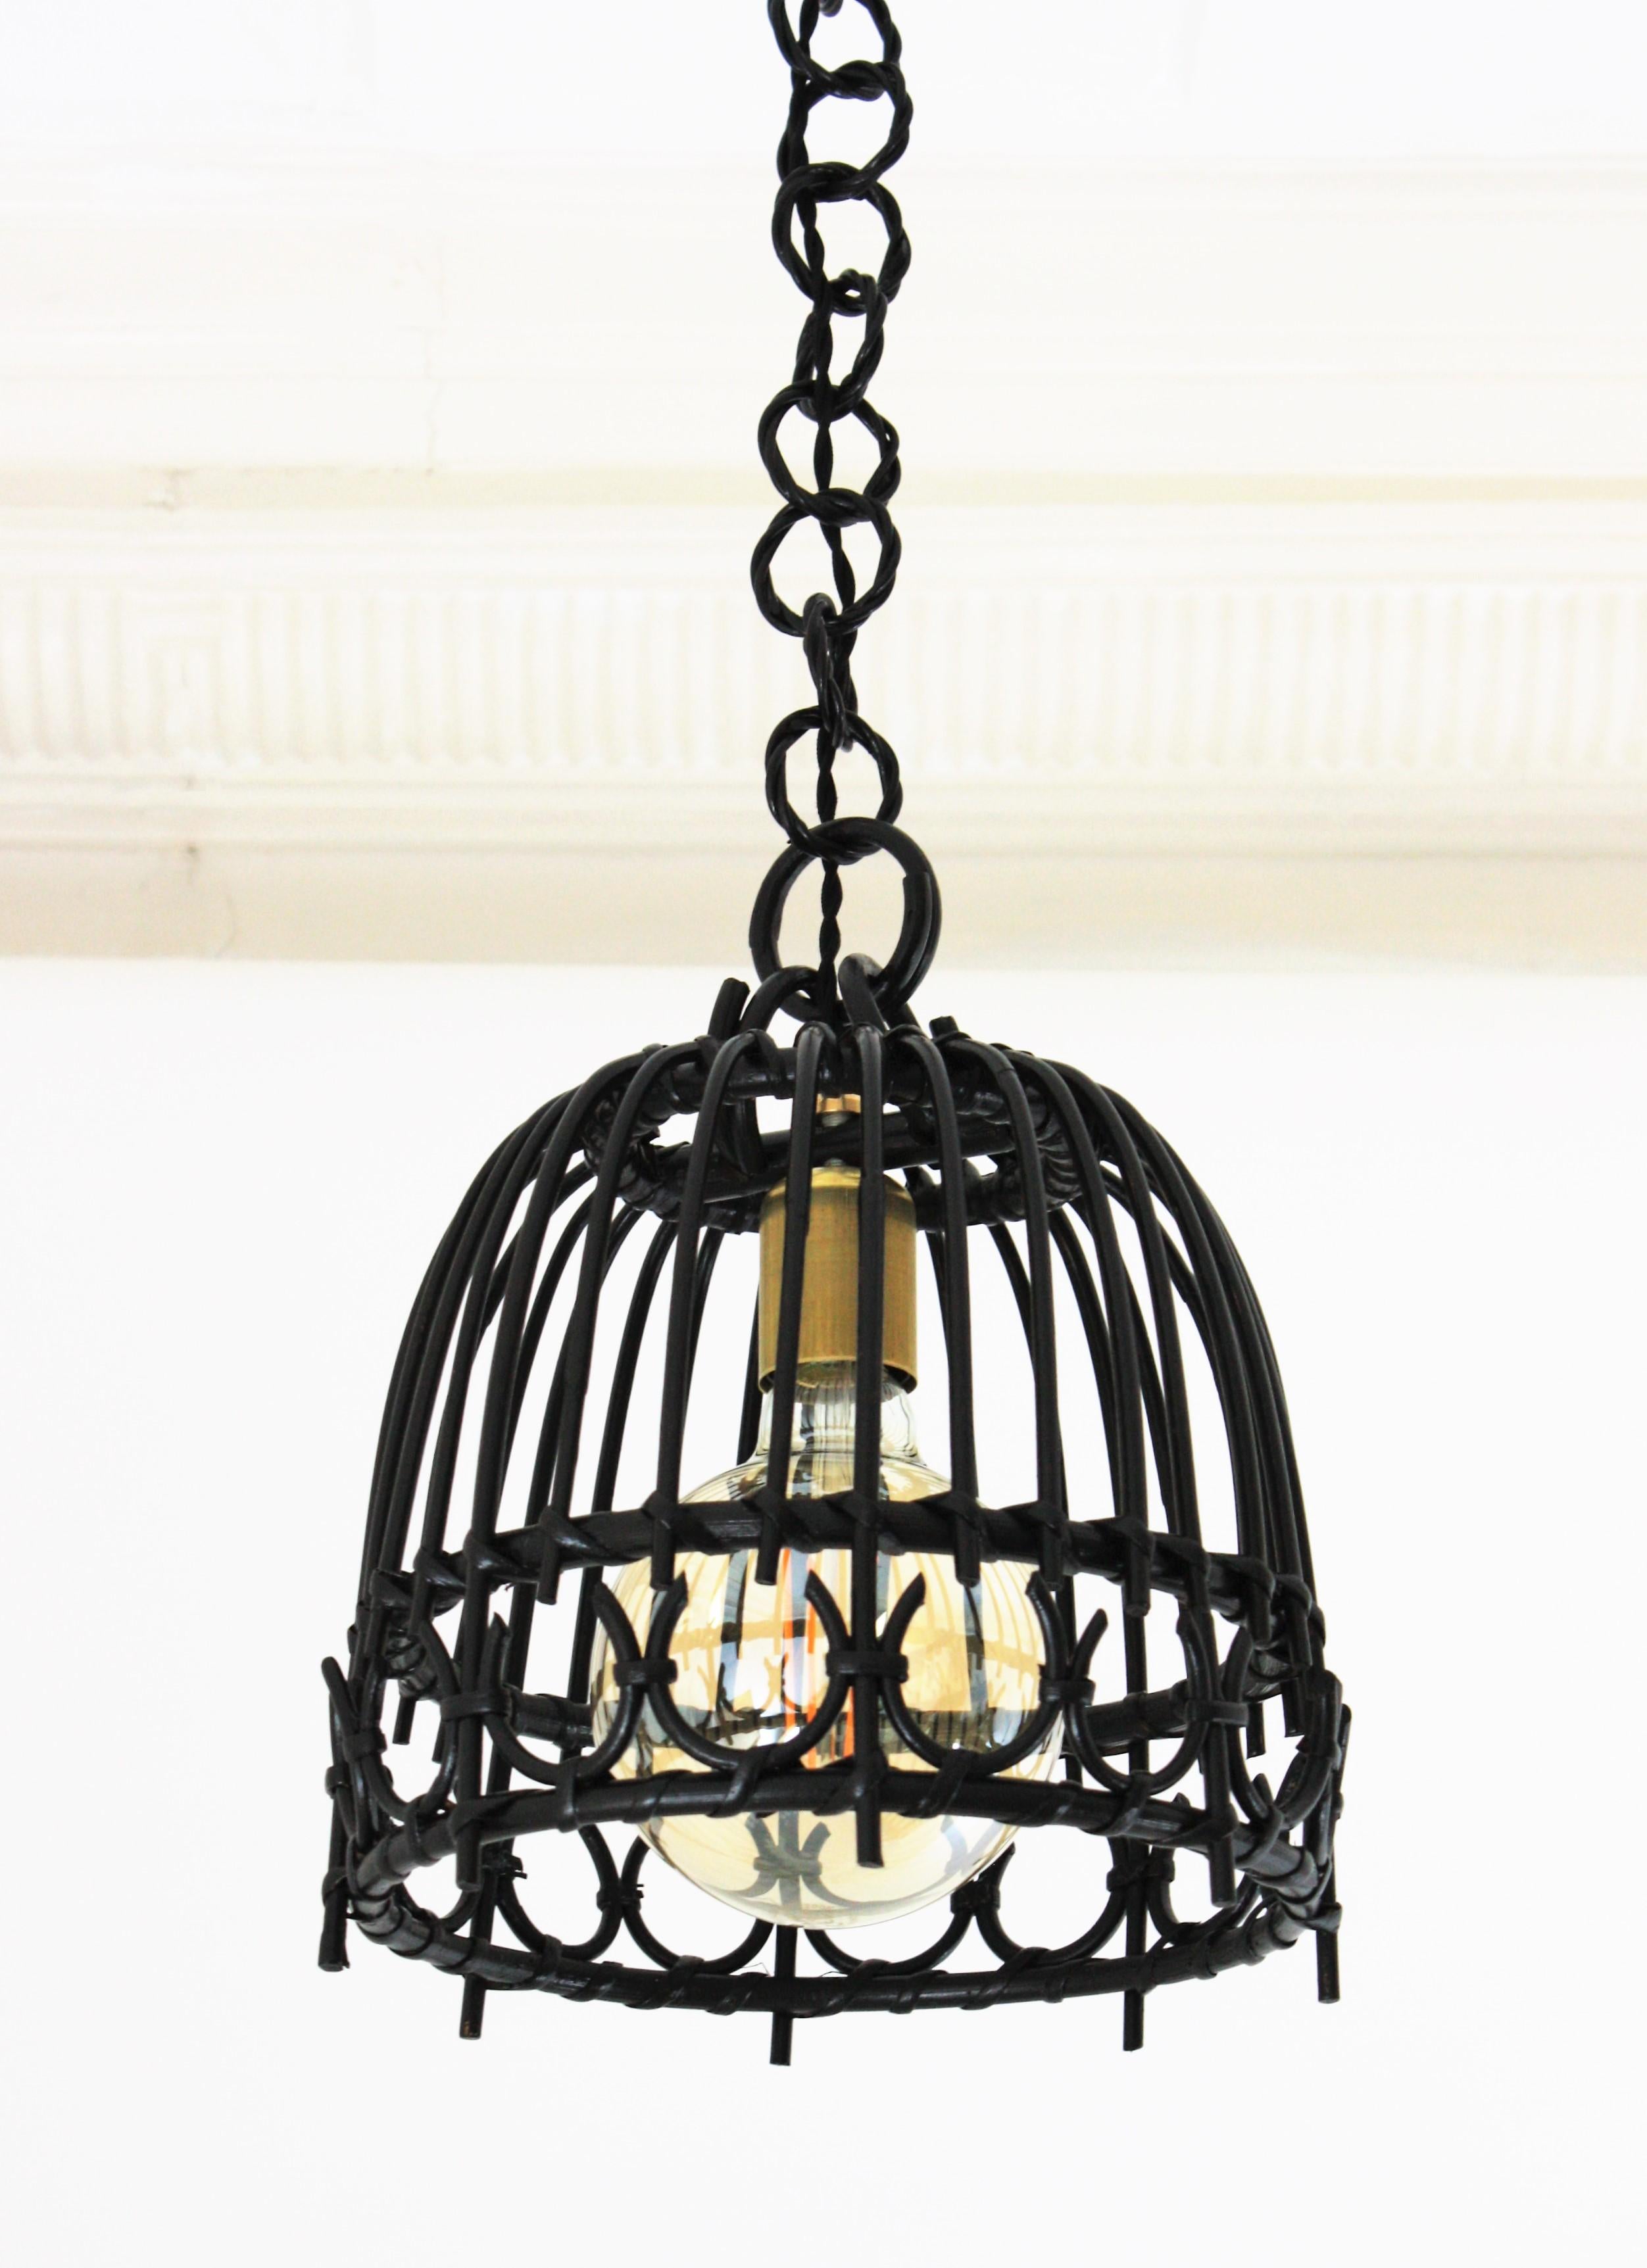 Midcentury Spanish rattan and bamboo bell shaped pendant hanging light finished in black patina, Spain, 1960s
This cool handcrafted rattan ceiling lamp / pendant hanging light has geometric decorative accents. It hangs from a round rings rattan